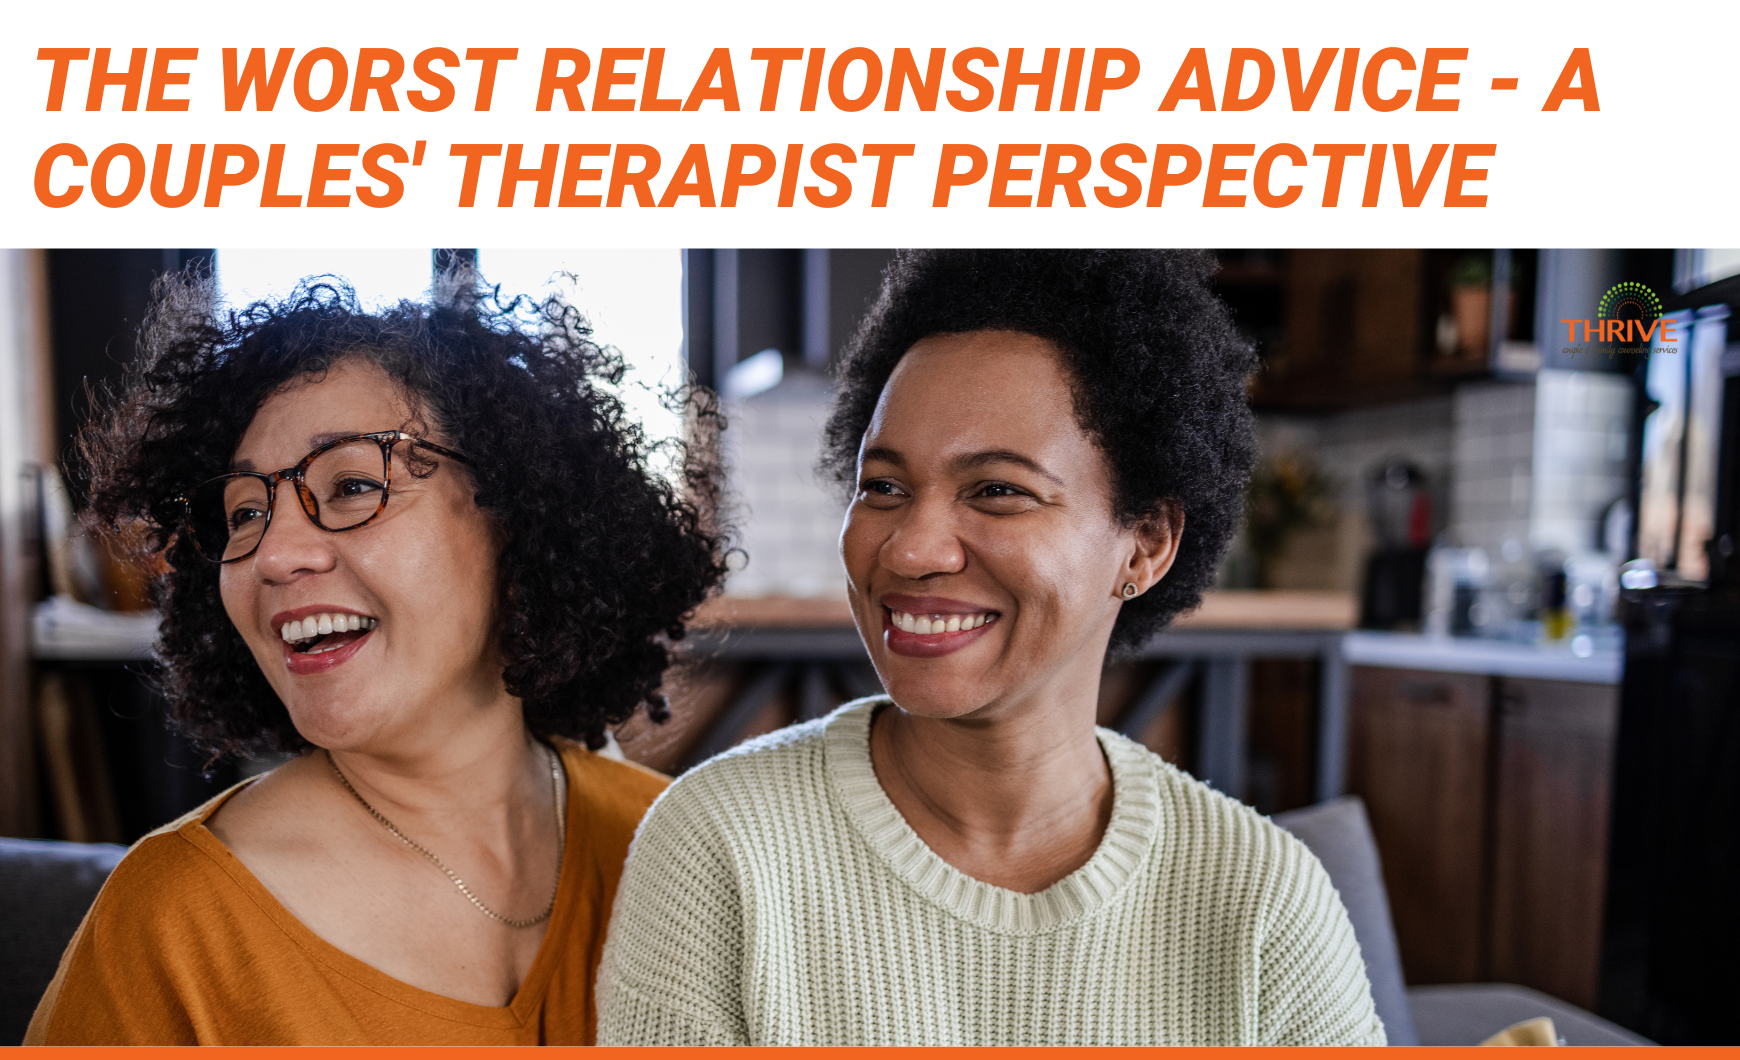 Dark orange text that reads "The Worst Relationship Advice - A Couples' Therapist Perspective" above a stock photo of a middle aged lesbian couple sitting closely together on the couch, smiling.